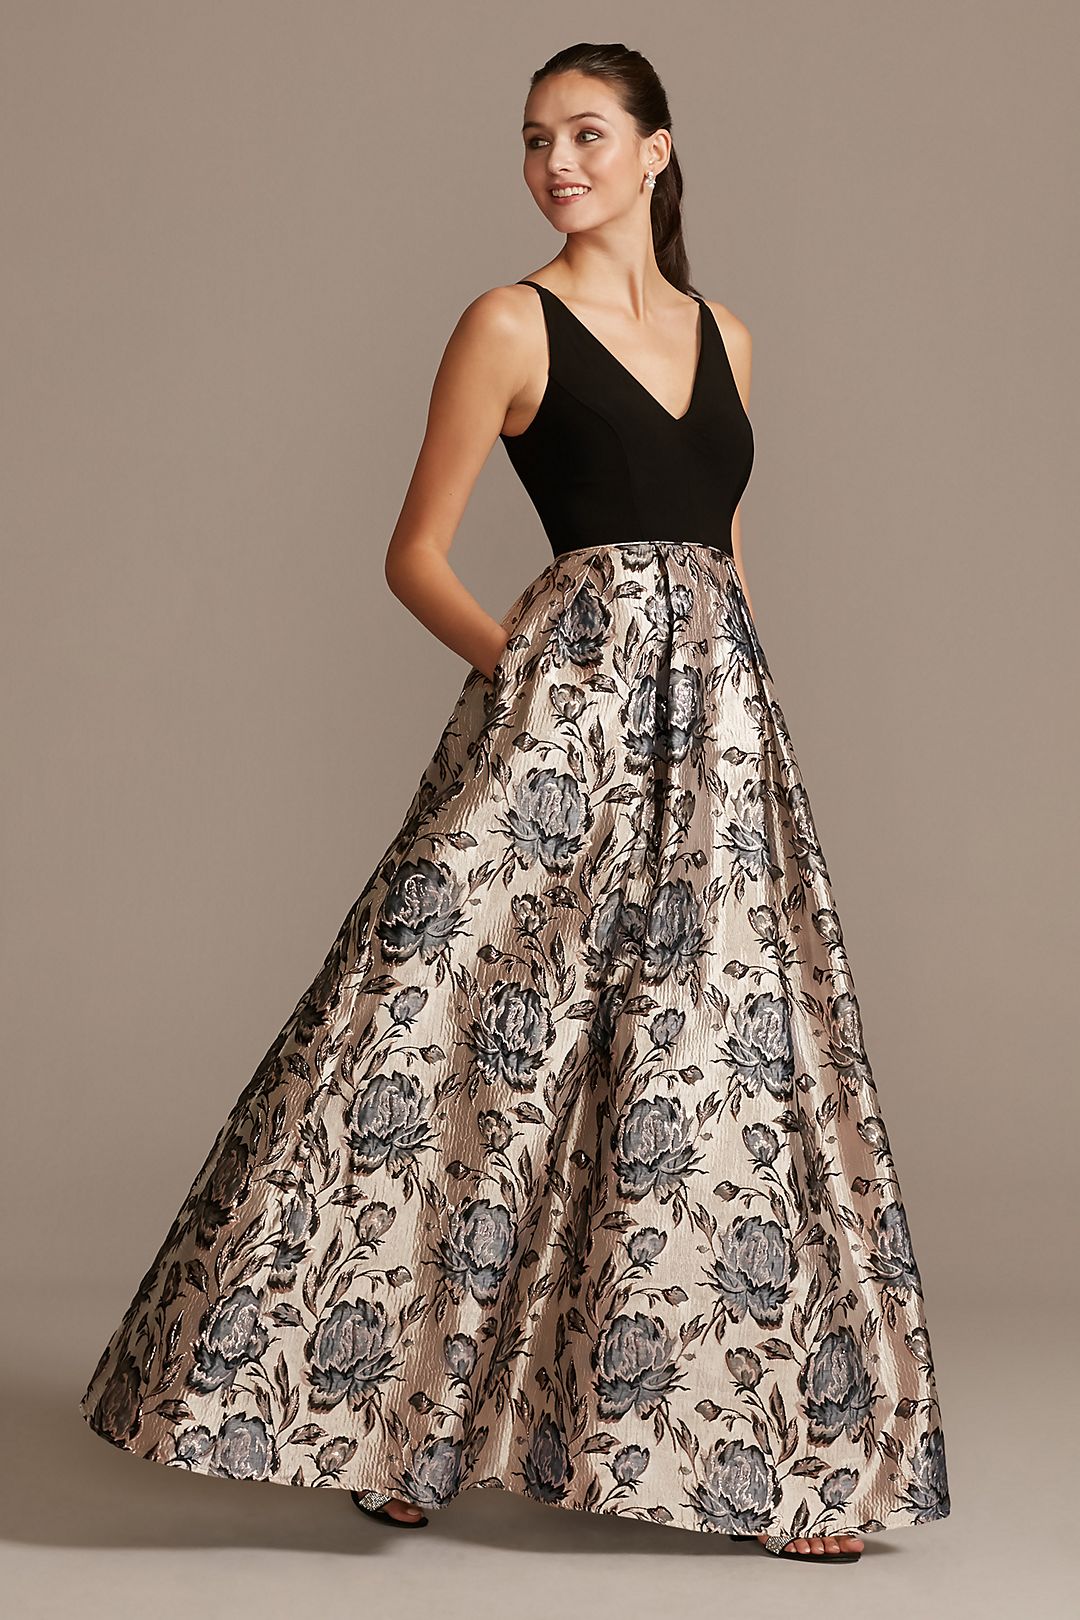 V-Neck Ball Gown with Floral Jacquard Skirt Image